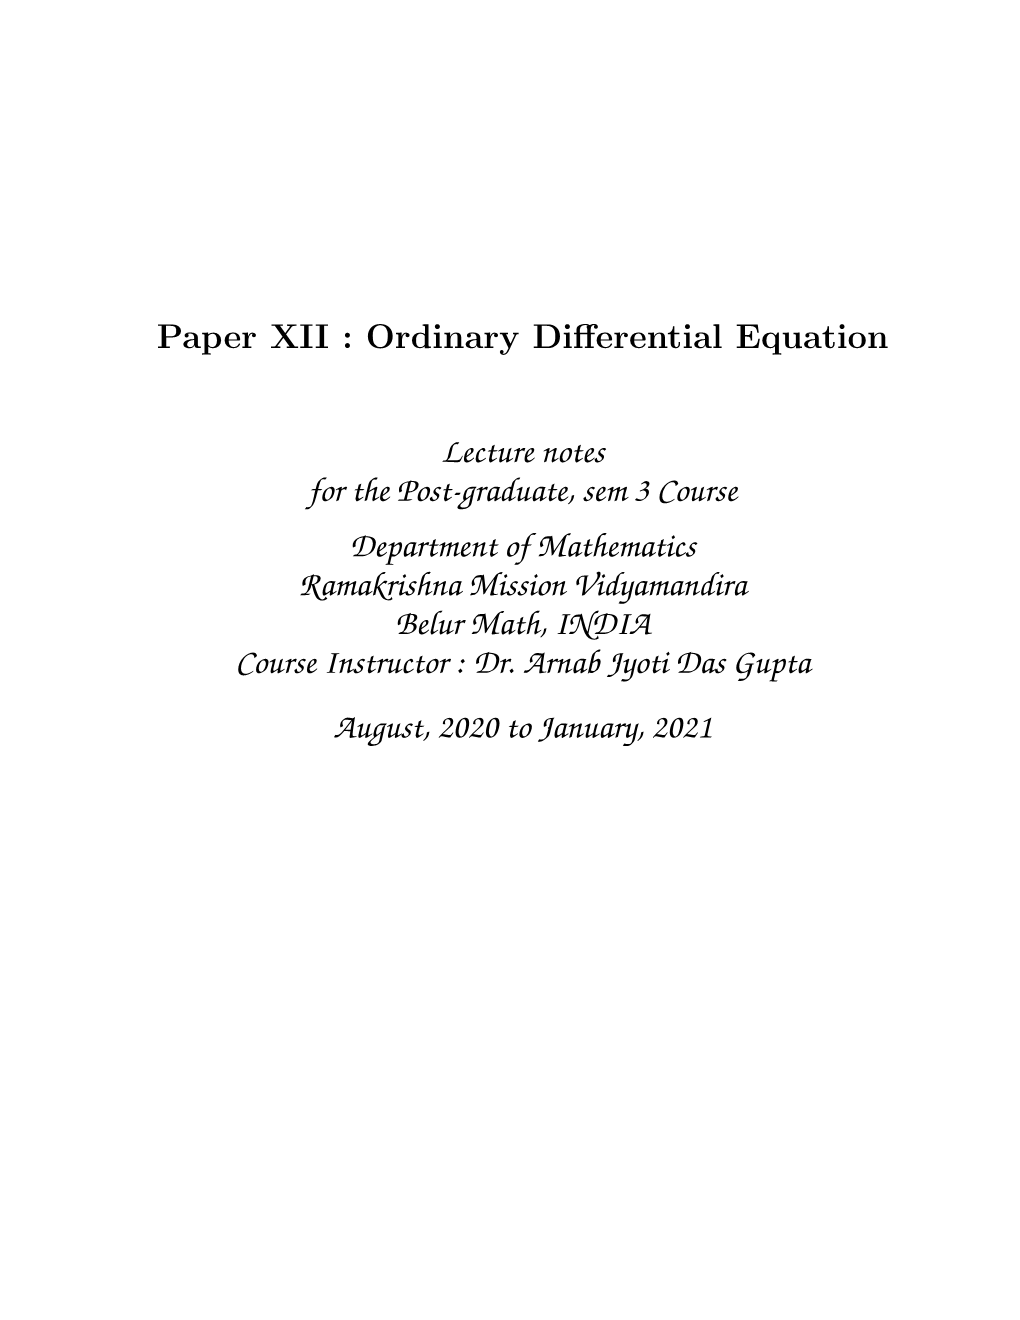 Ordinary Differential Equation Lecture Notes for the Post-Graduate, Sem 3